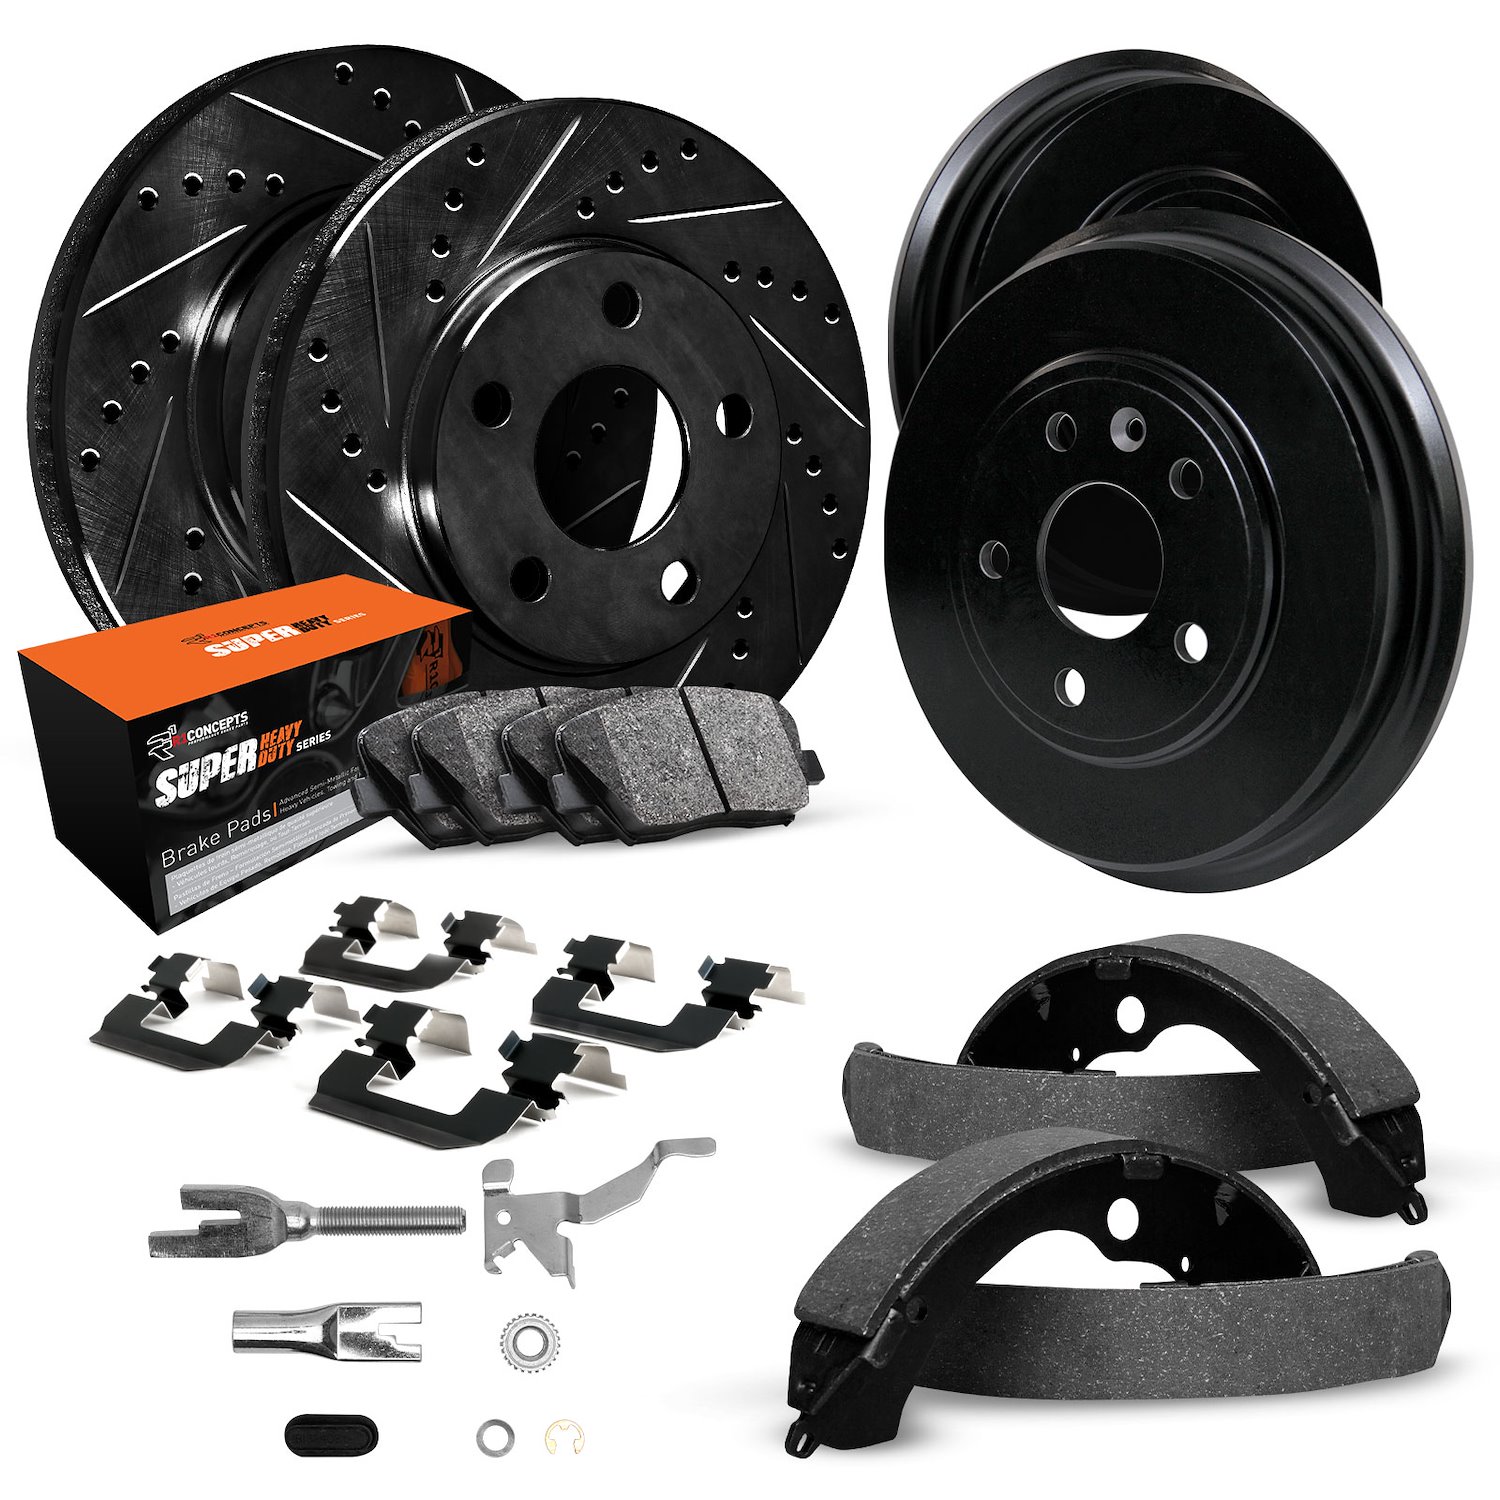 E-Line Drilled/Slotted Black Rotor & Drum Set w/Super-Duty Pads, Shoes, Hardware/Adjusters, 1999-2003 Ford/Lincoln/Mercury/Mazda